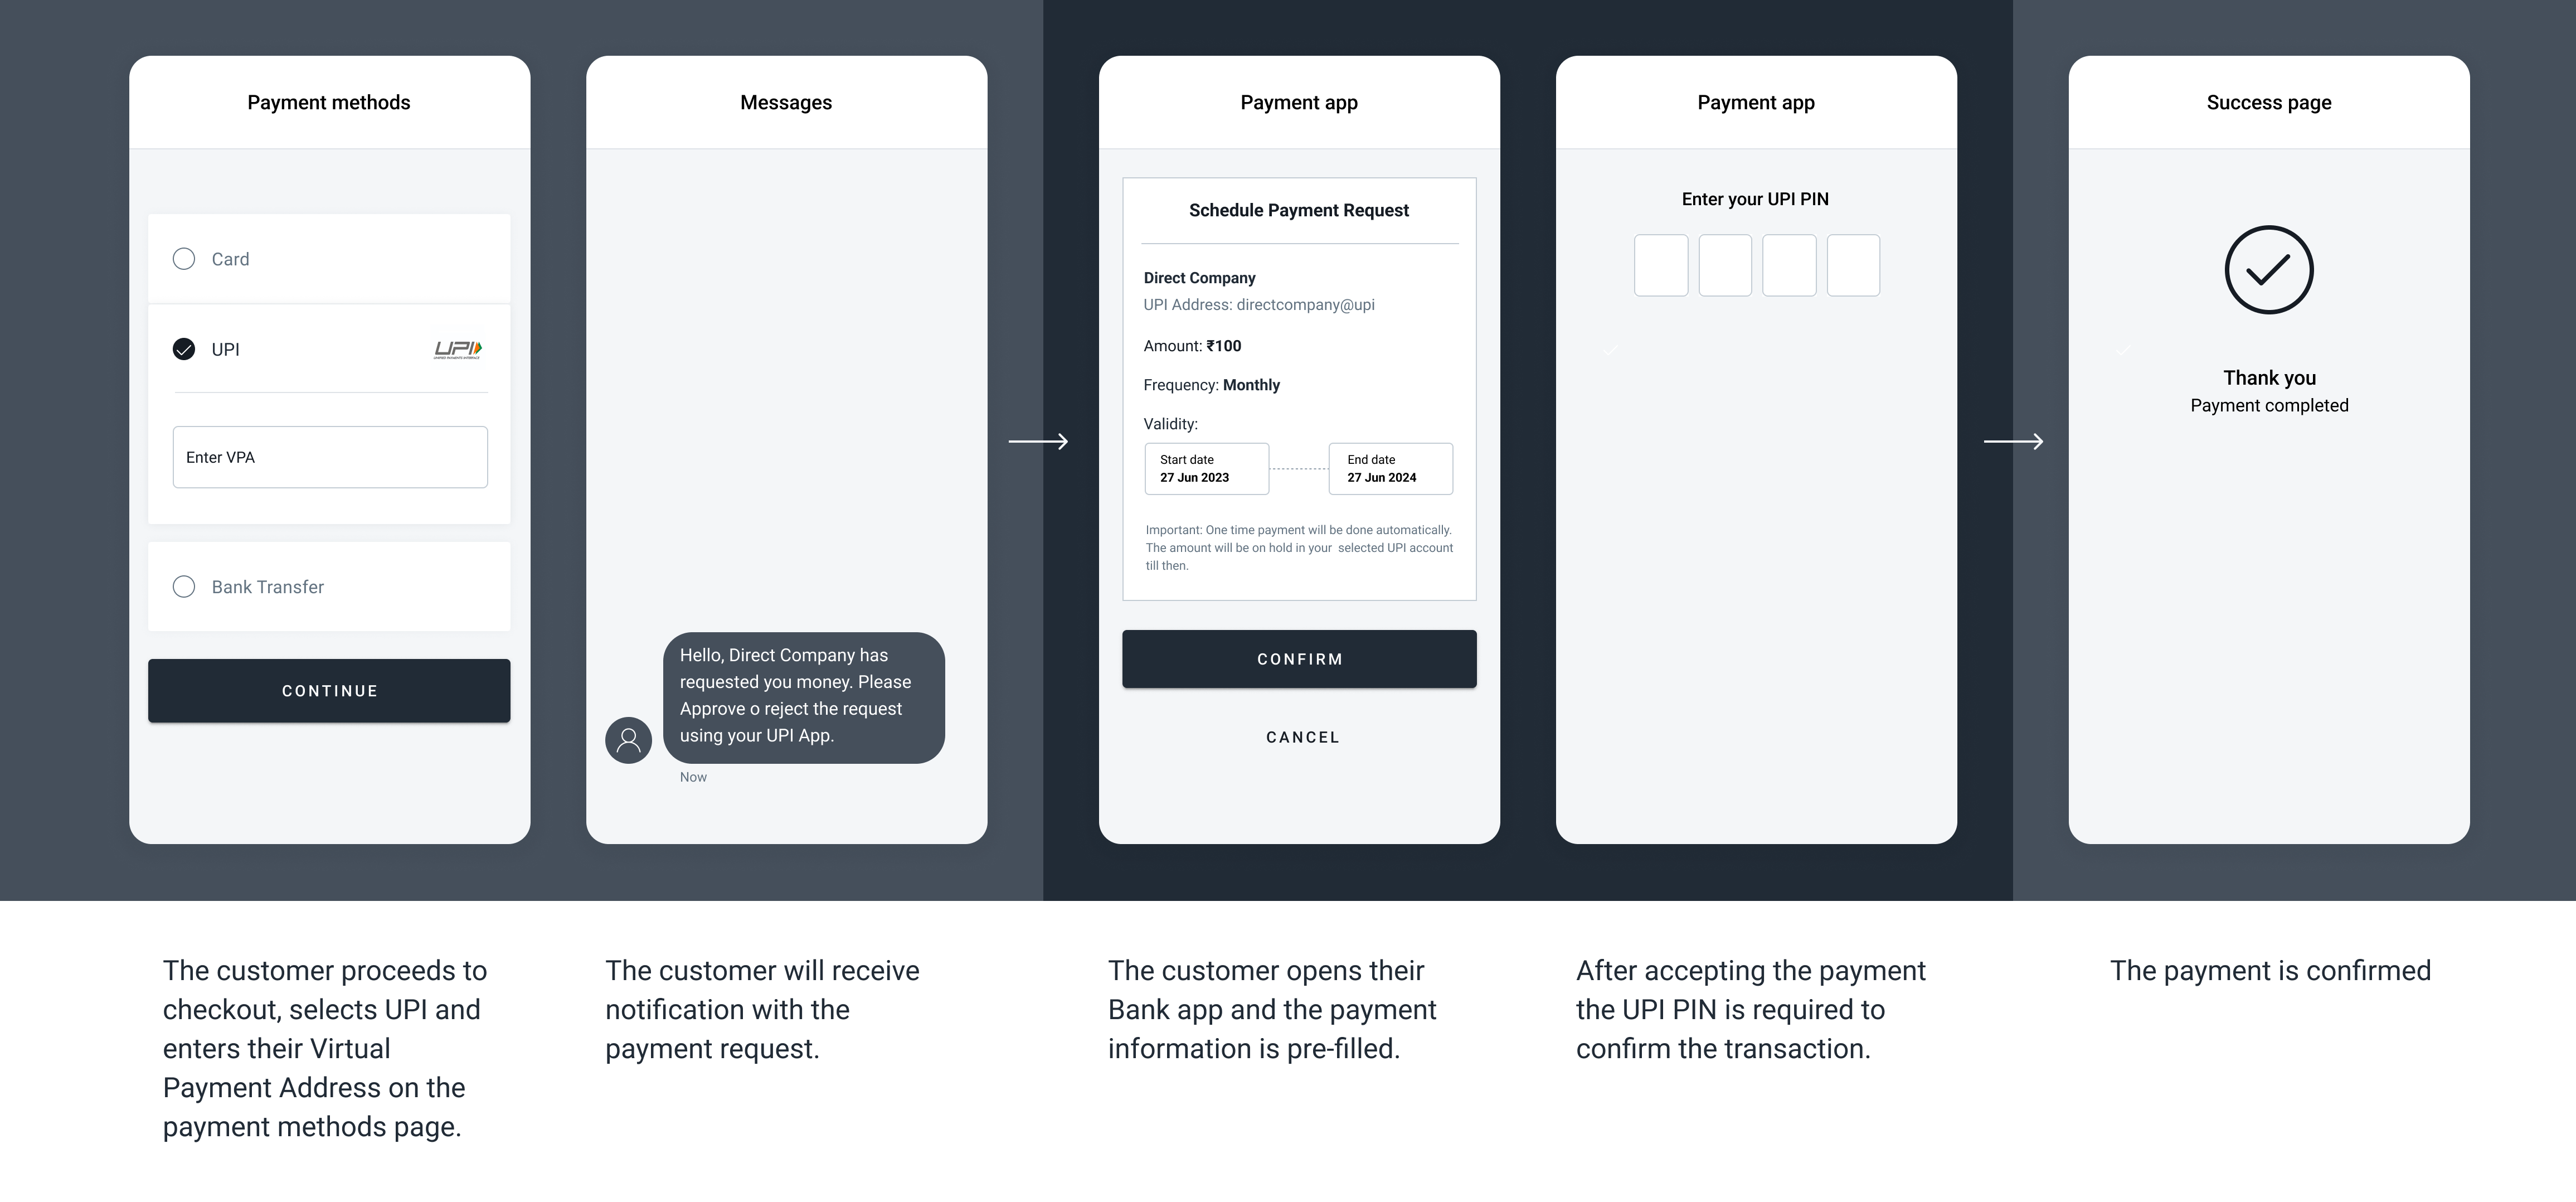 The screenshots illustrate a generic redirect UPI Recurring payment flow. The details of the flow can change according the payment method selected.